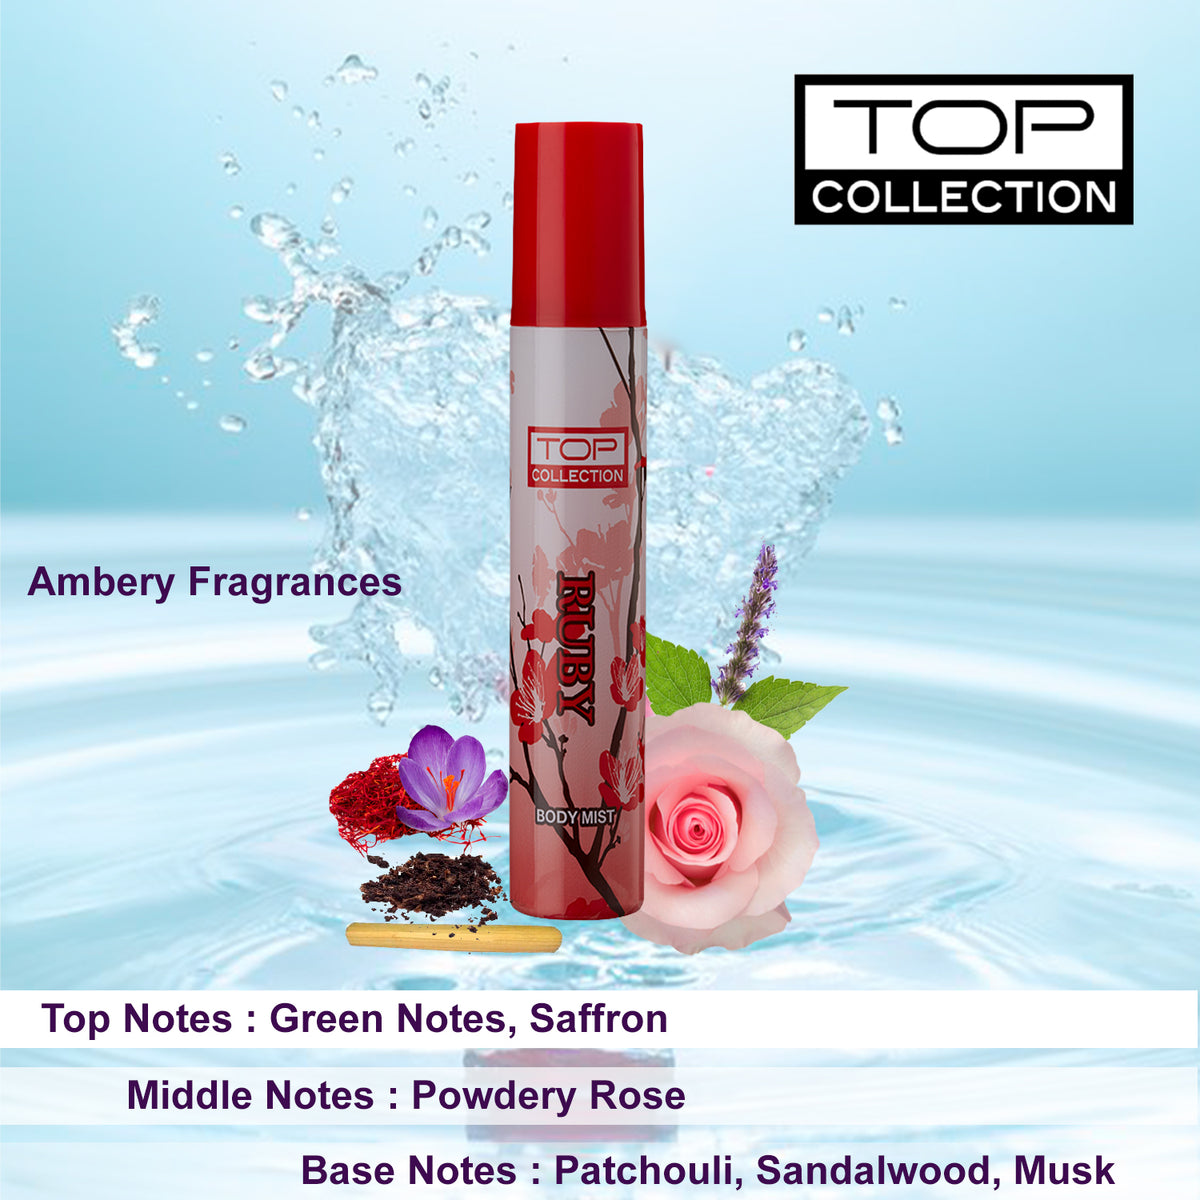 Top Collection Body Mist - Ruby, 75ml